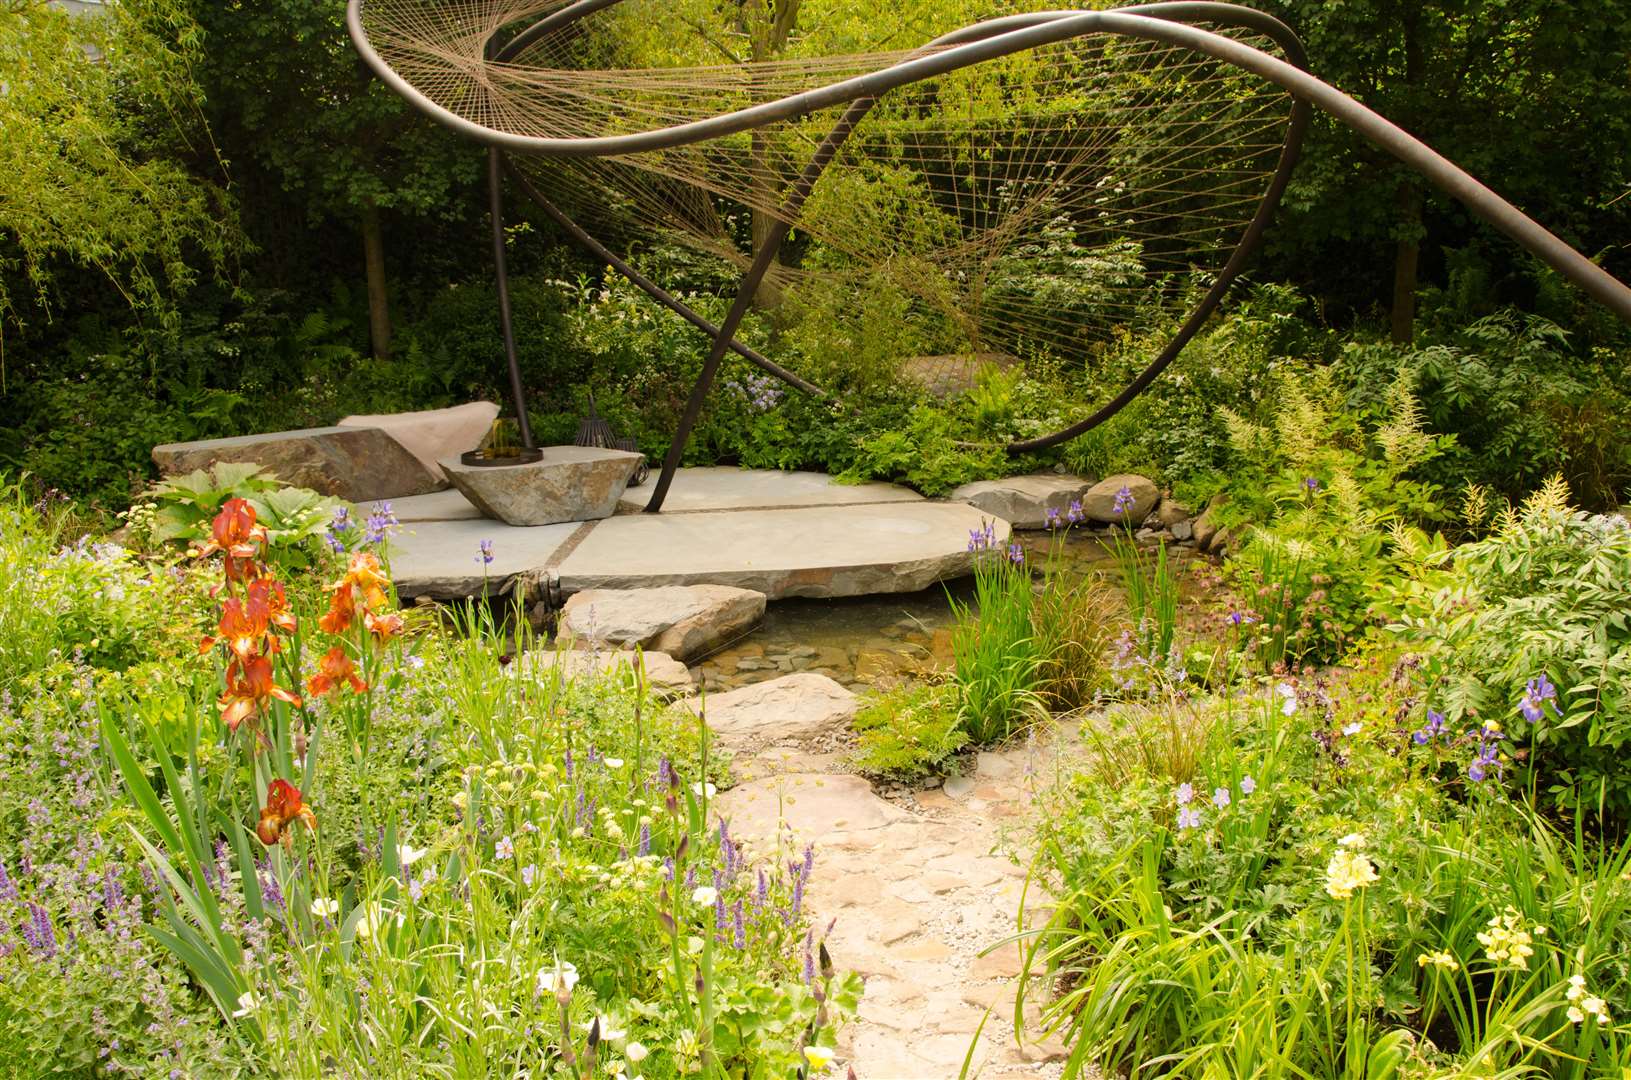 The Wedgwood Garden at the Chelsea Flower Show Picture: Ian West